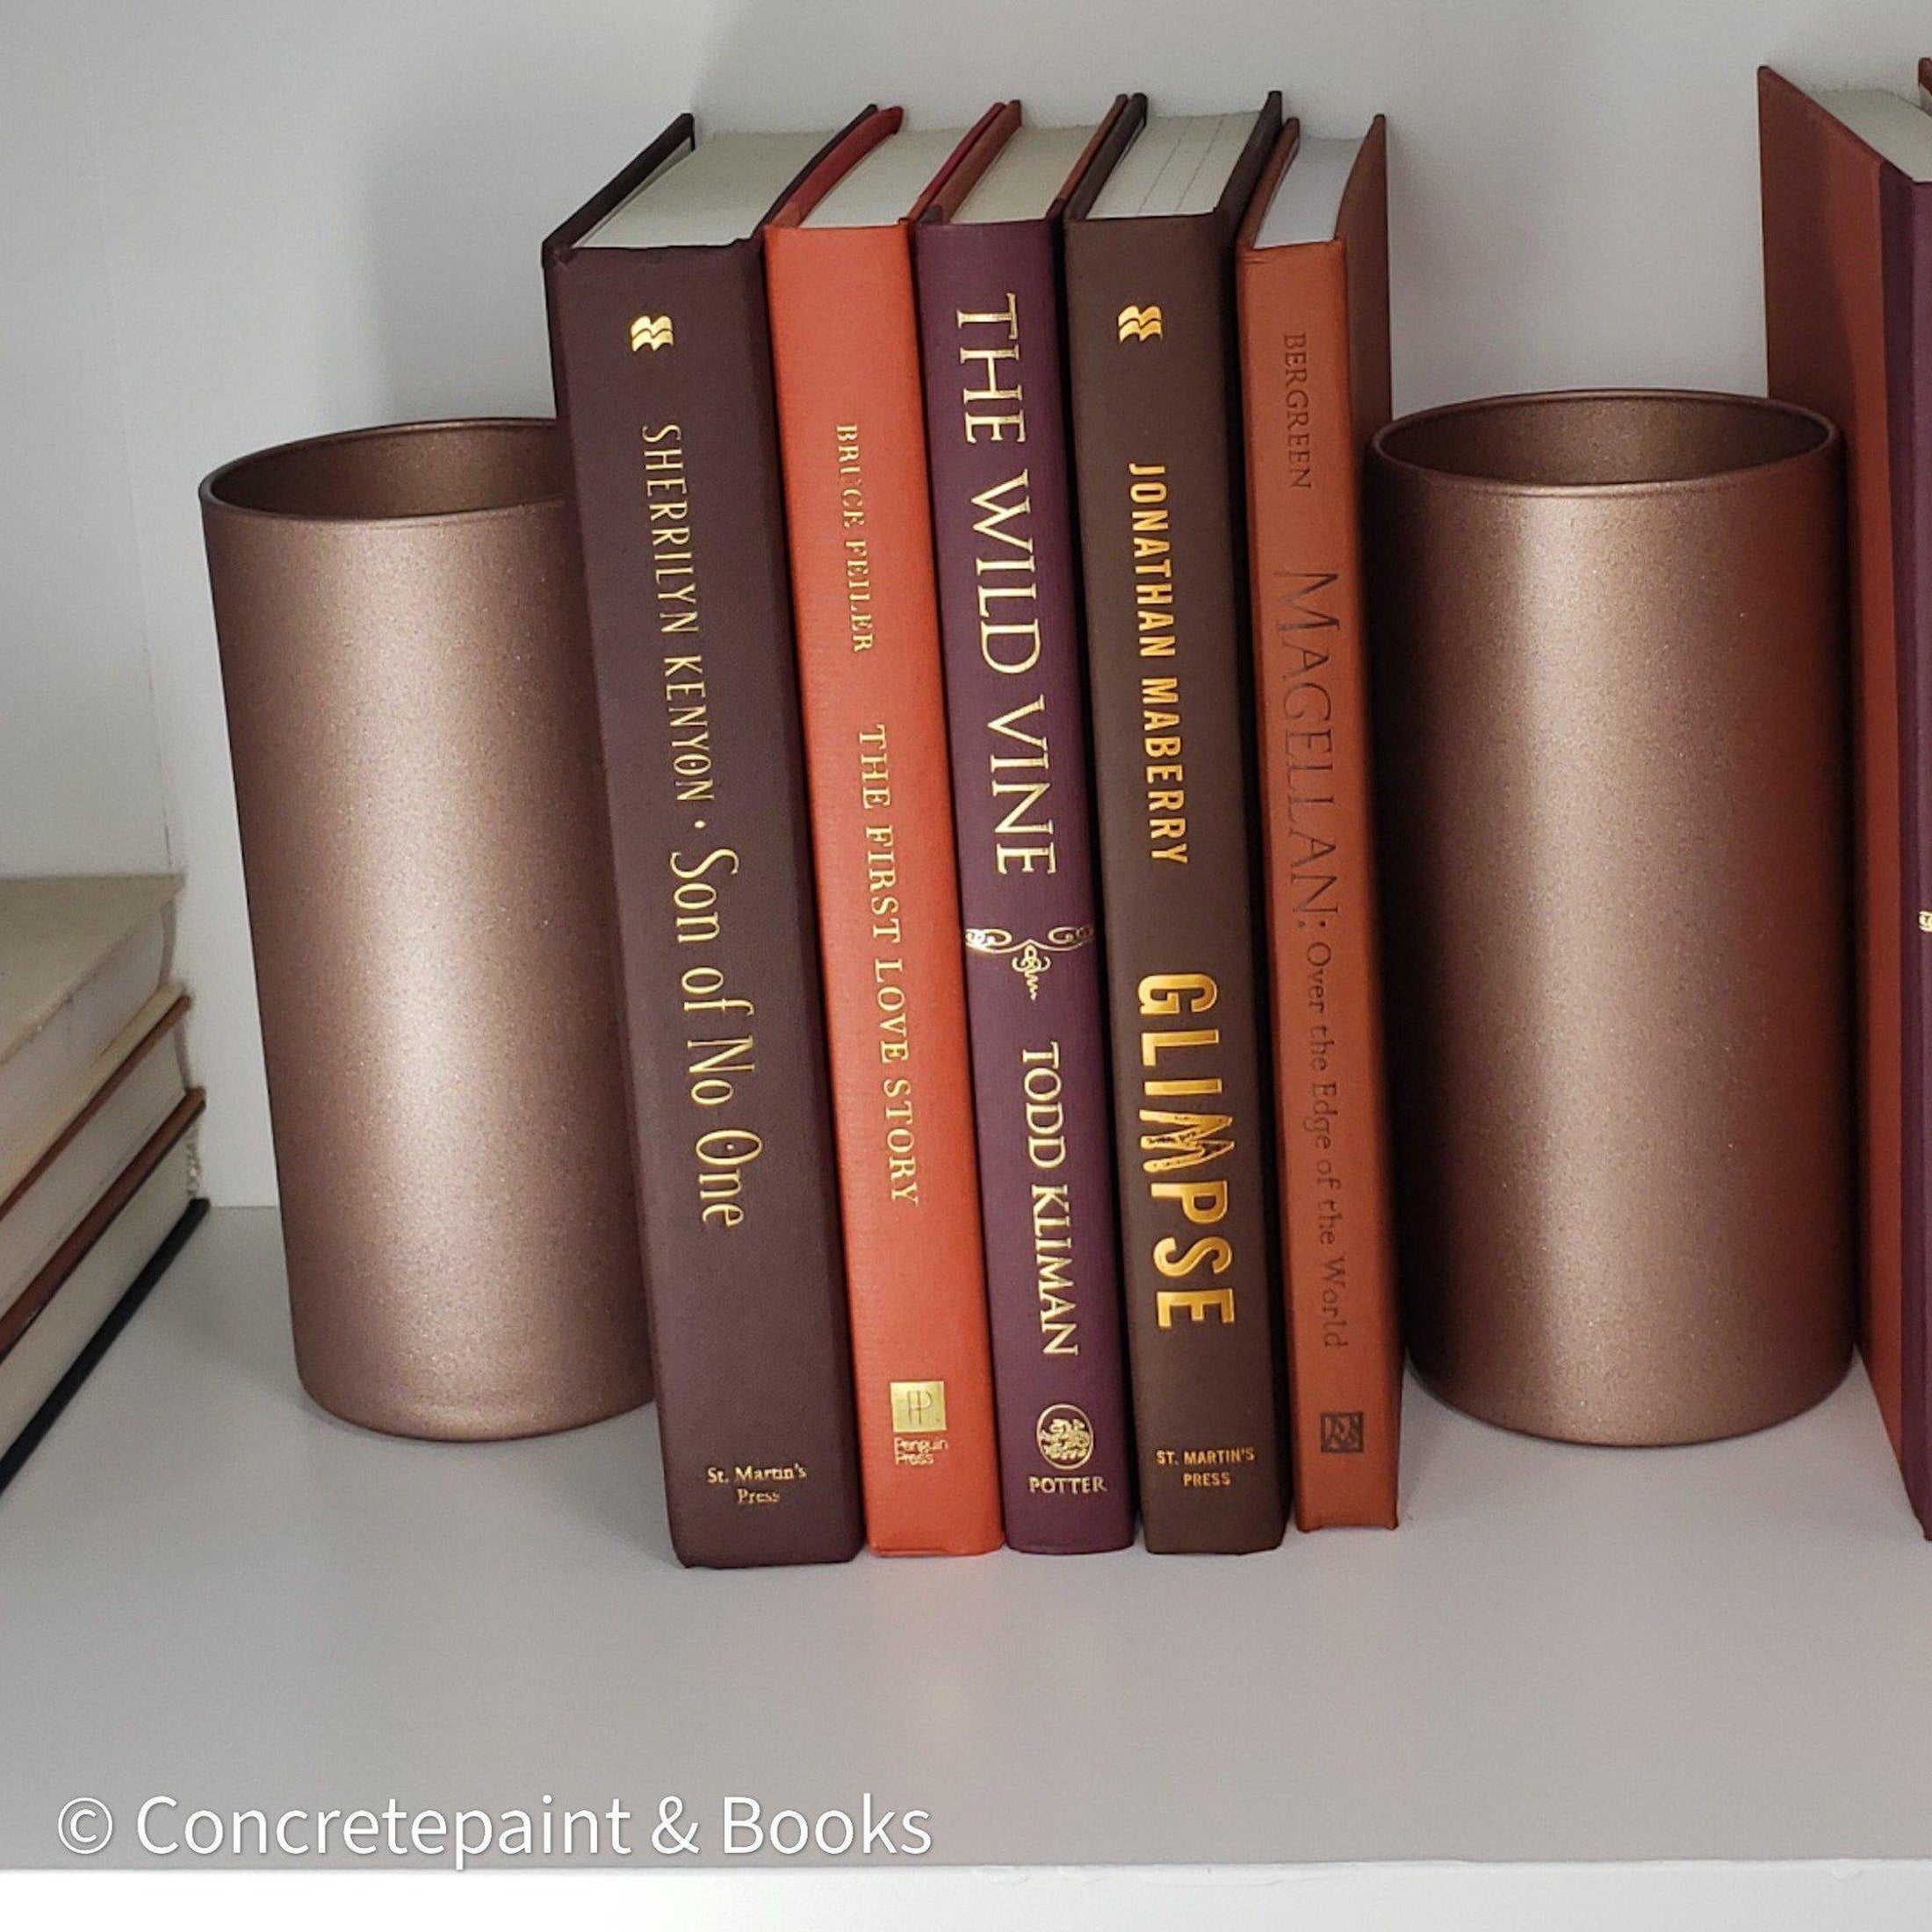 Rose Gold Metallic 7 | Display Books & Accents-Set of Decorative Books and Accents-[stack of real books for decorating]-[set of books with decorative accents]